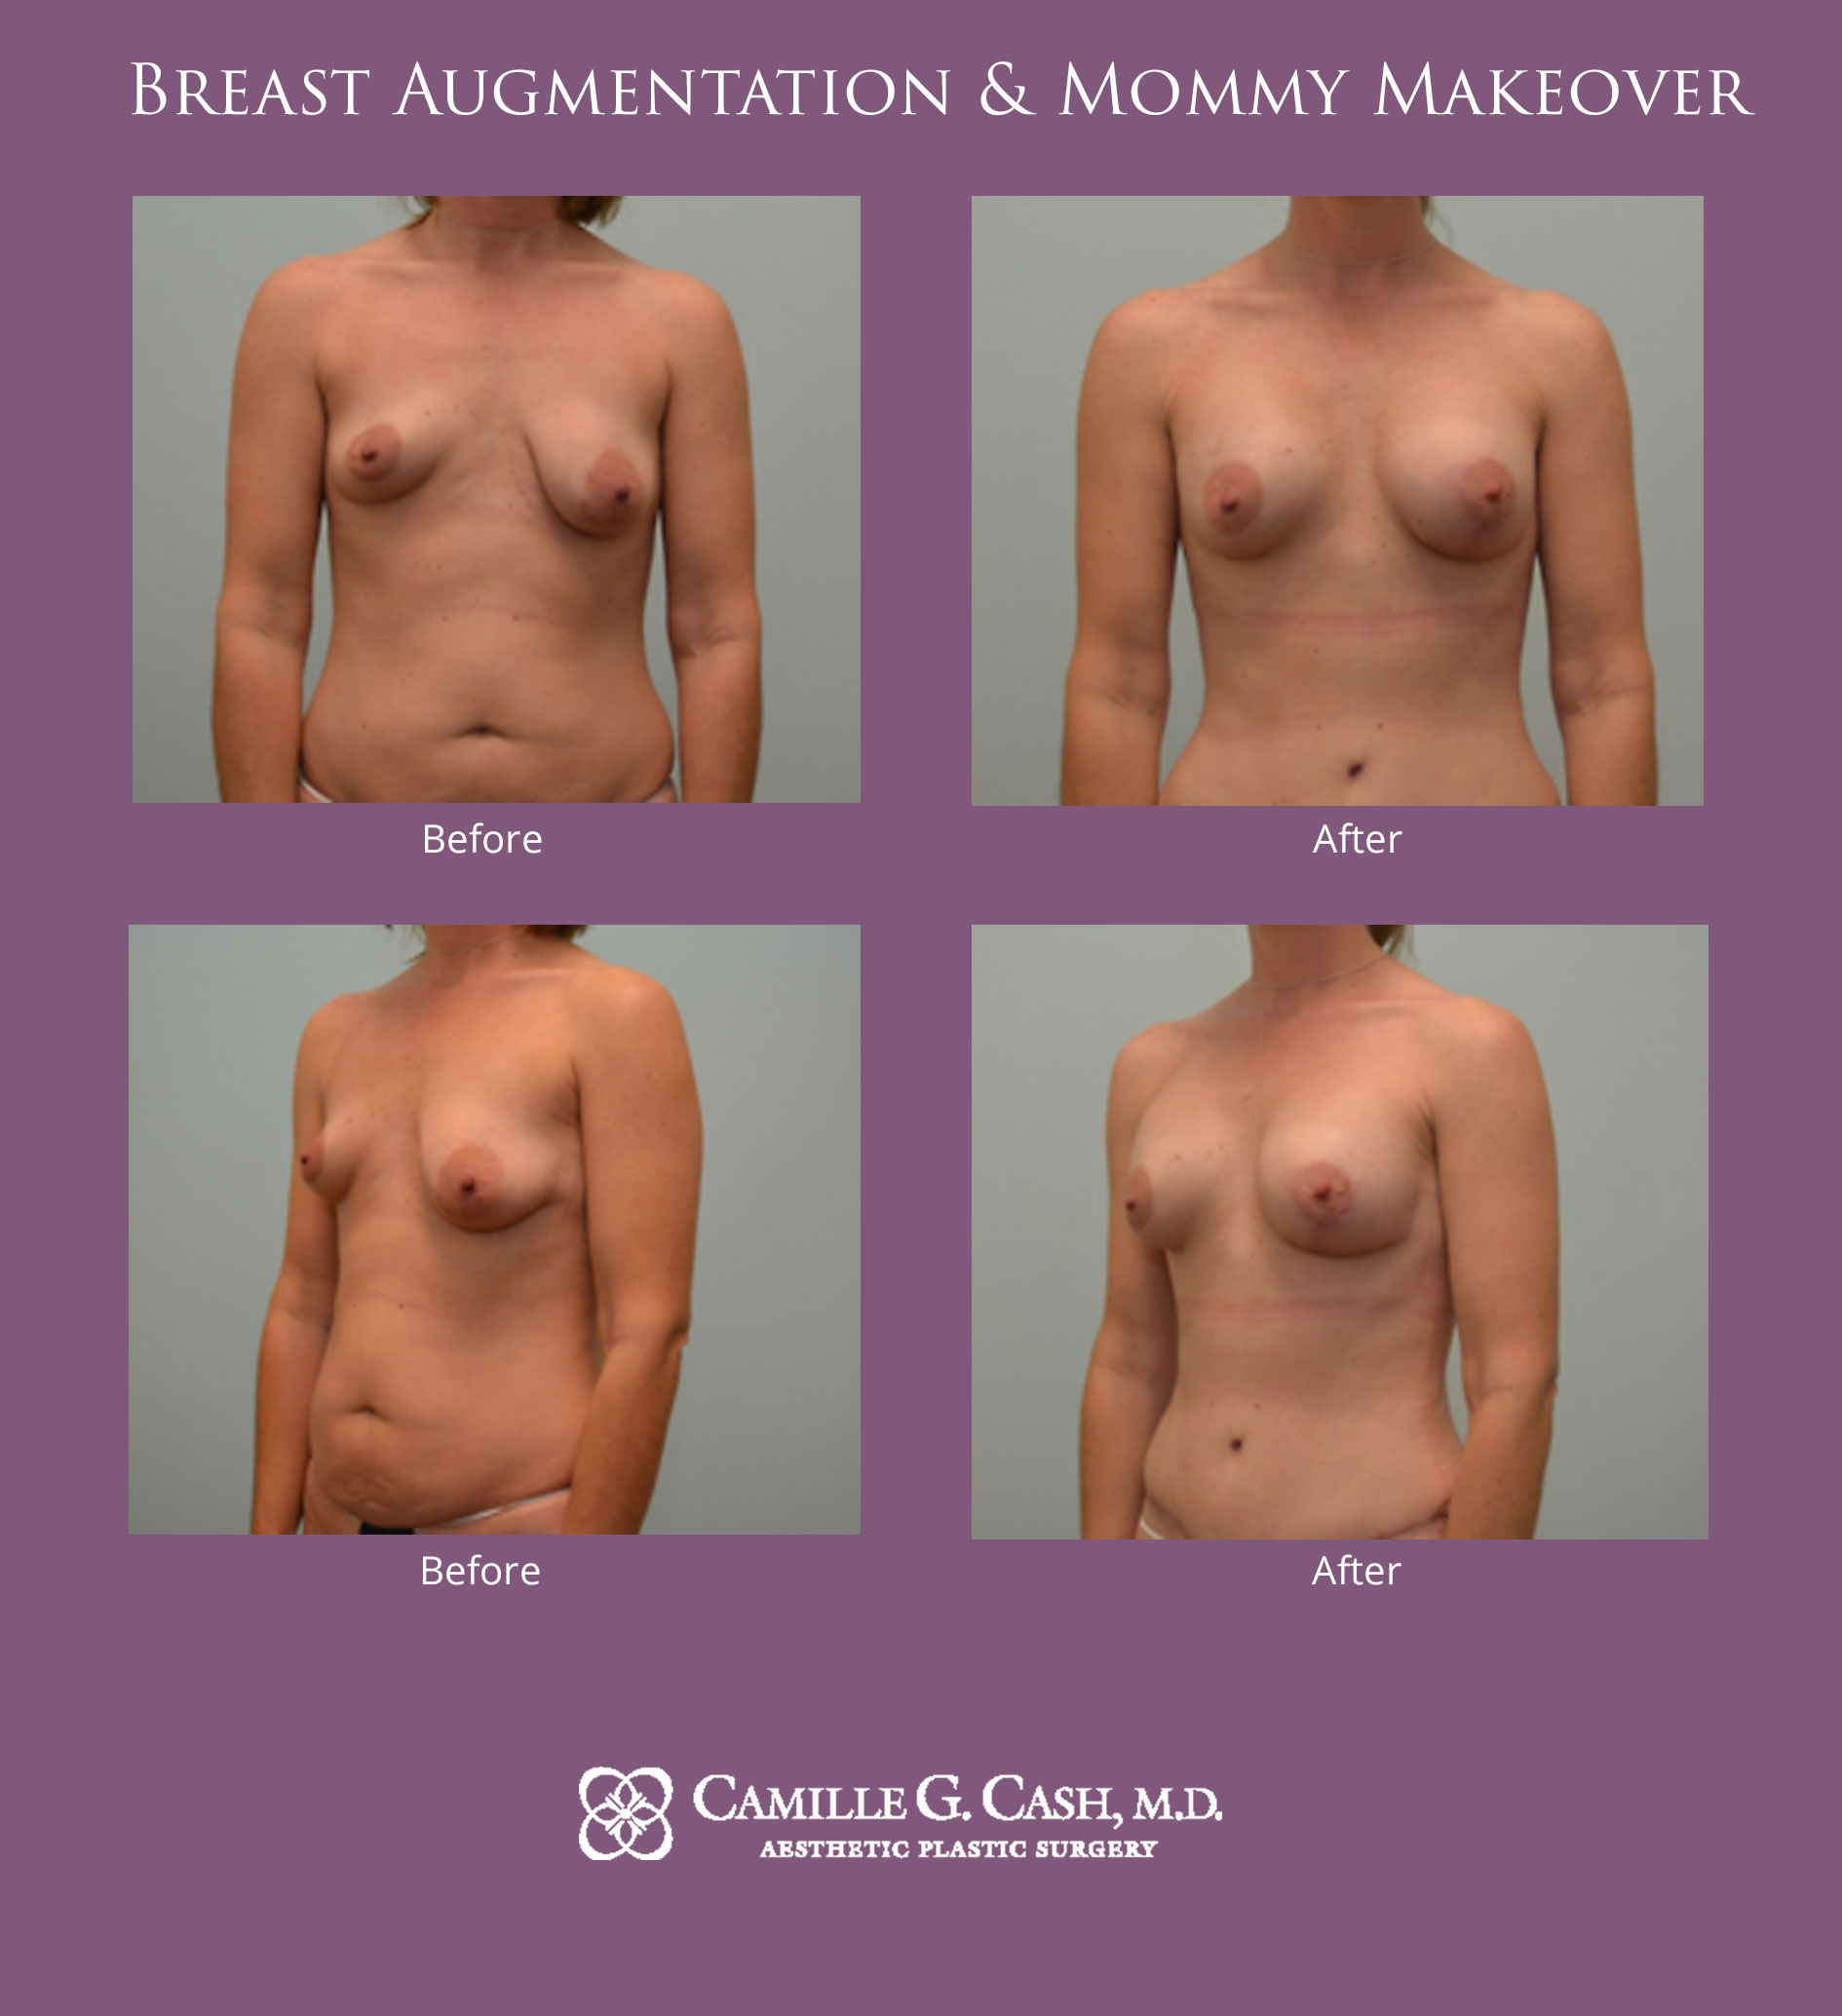 Breast augmentation & mommy makeover before and after photos